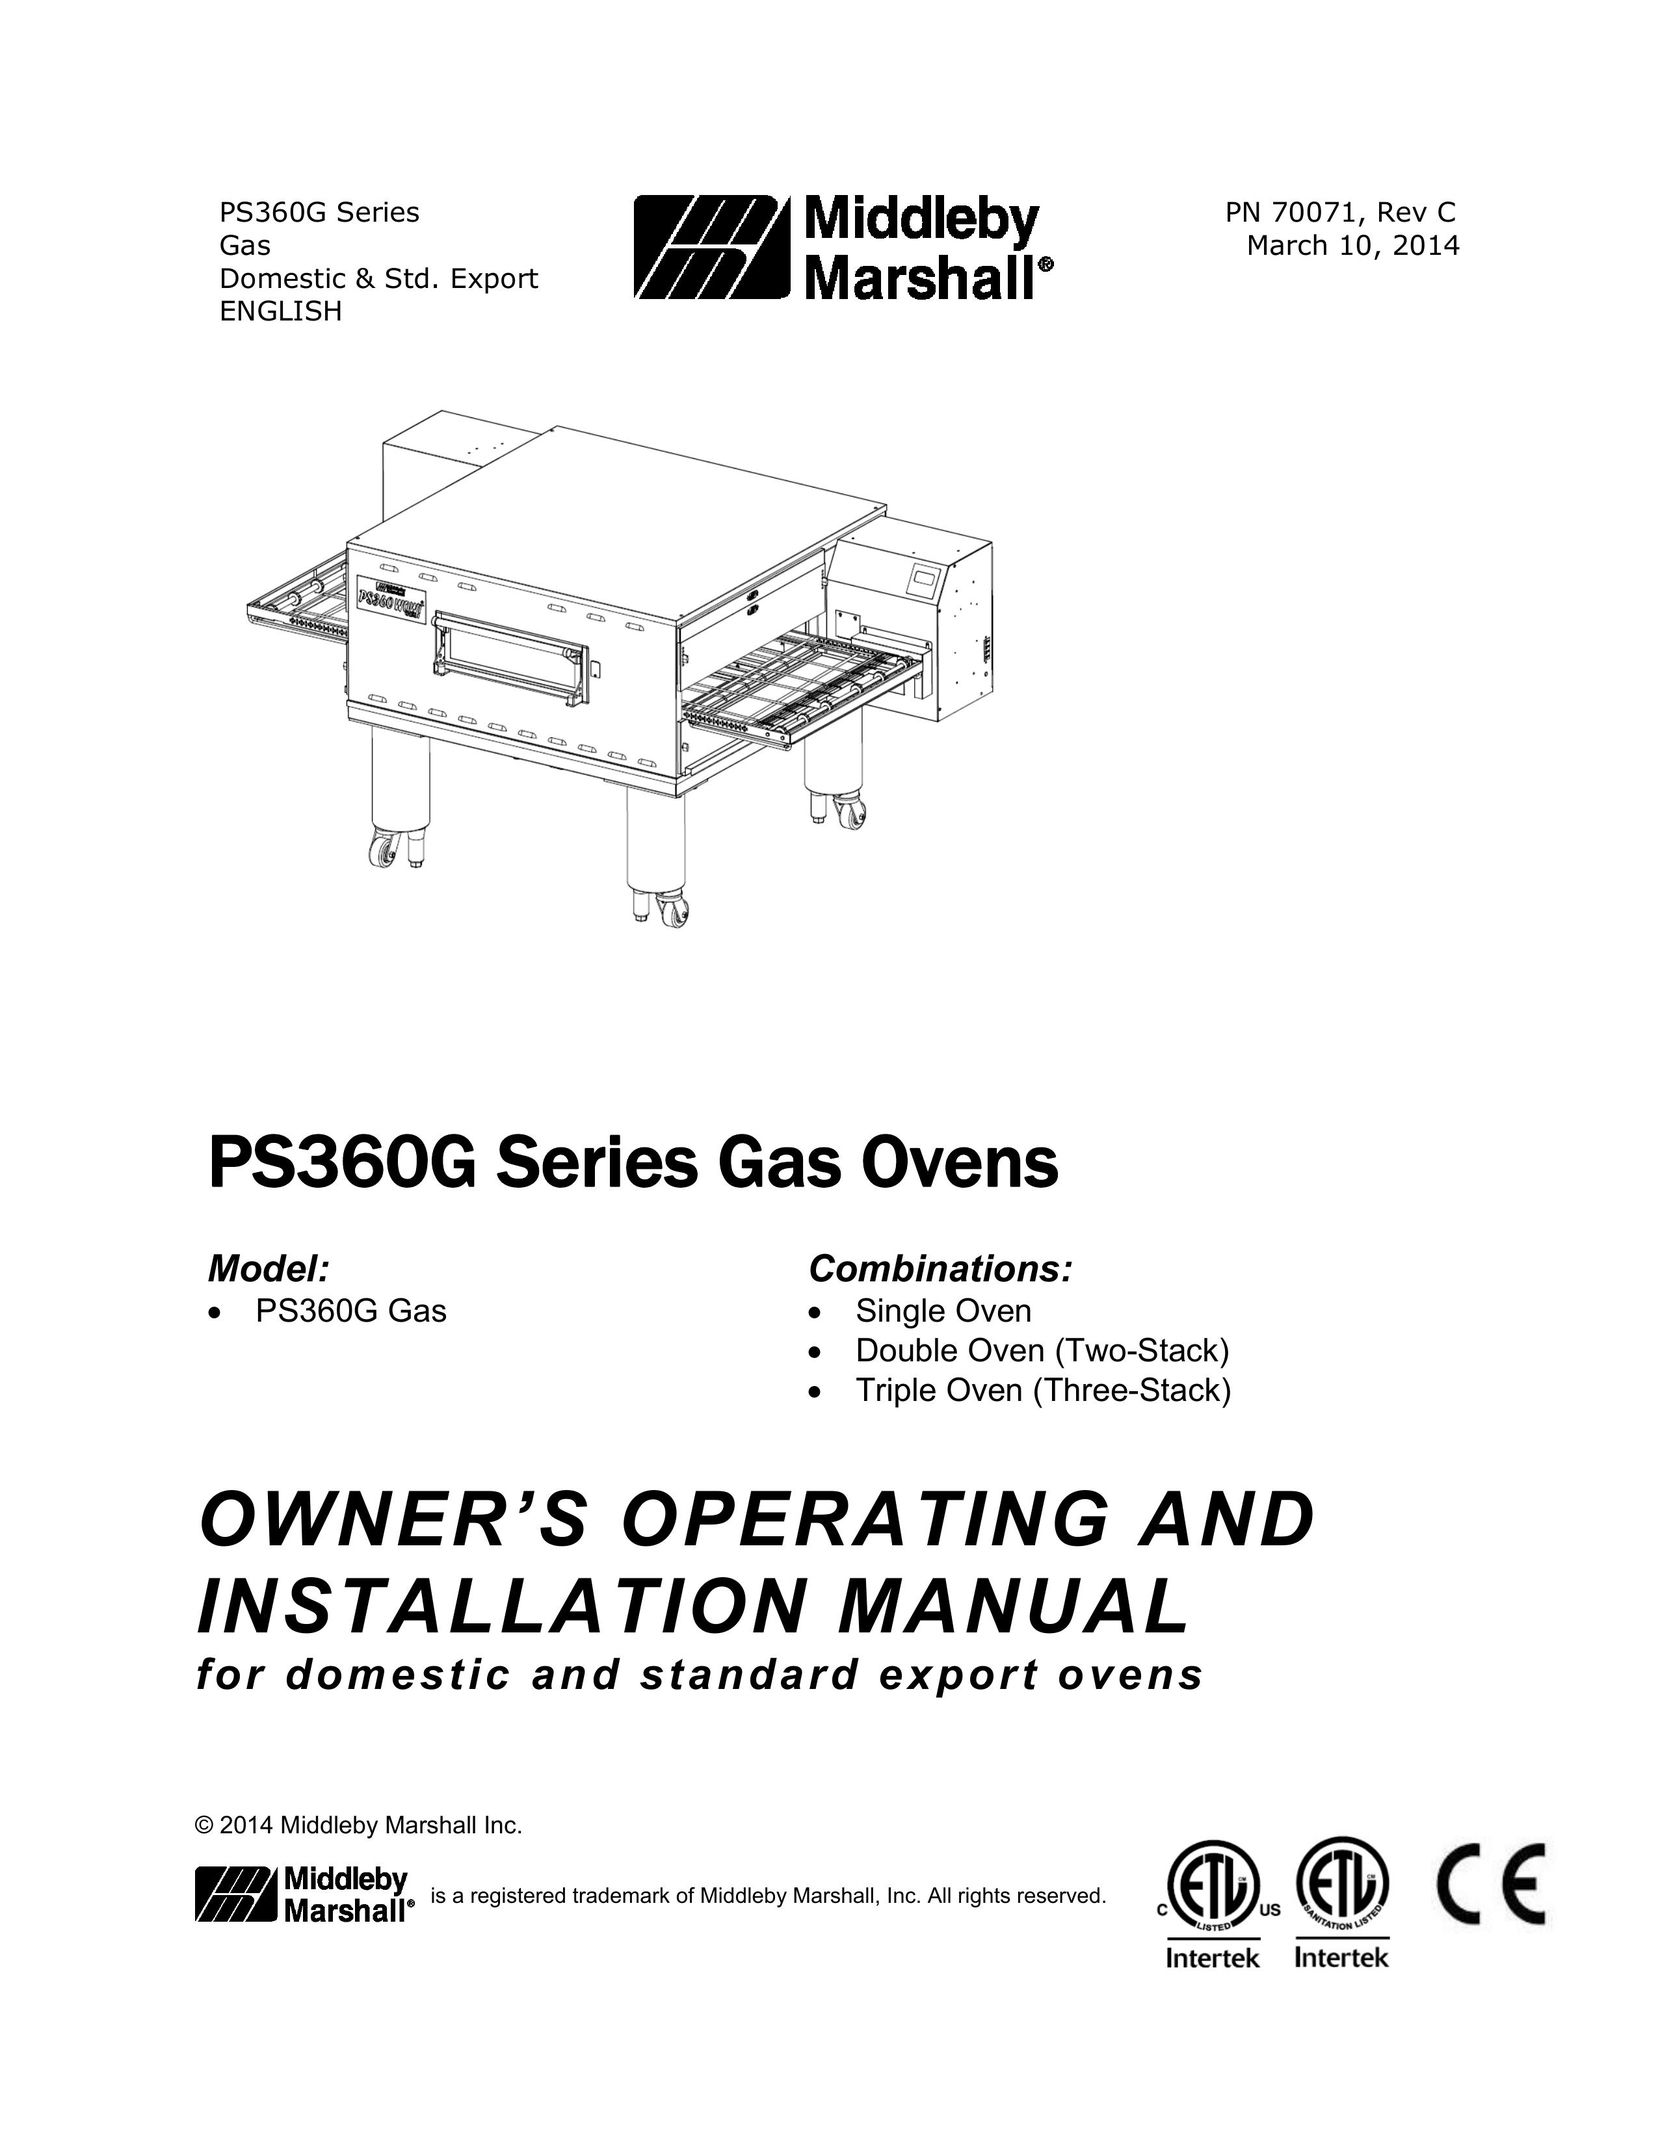 Middleby Marshall PS360G Oven User Manual